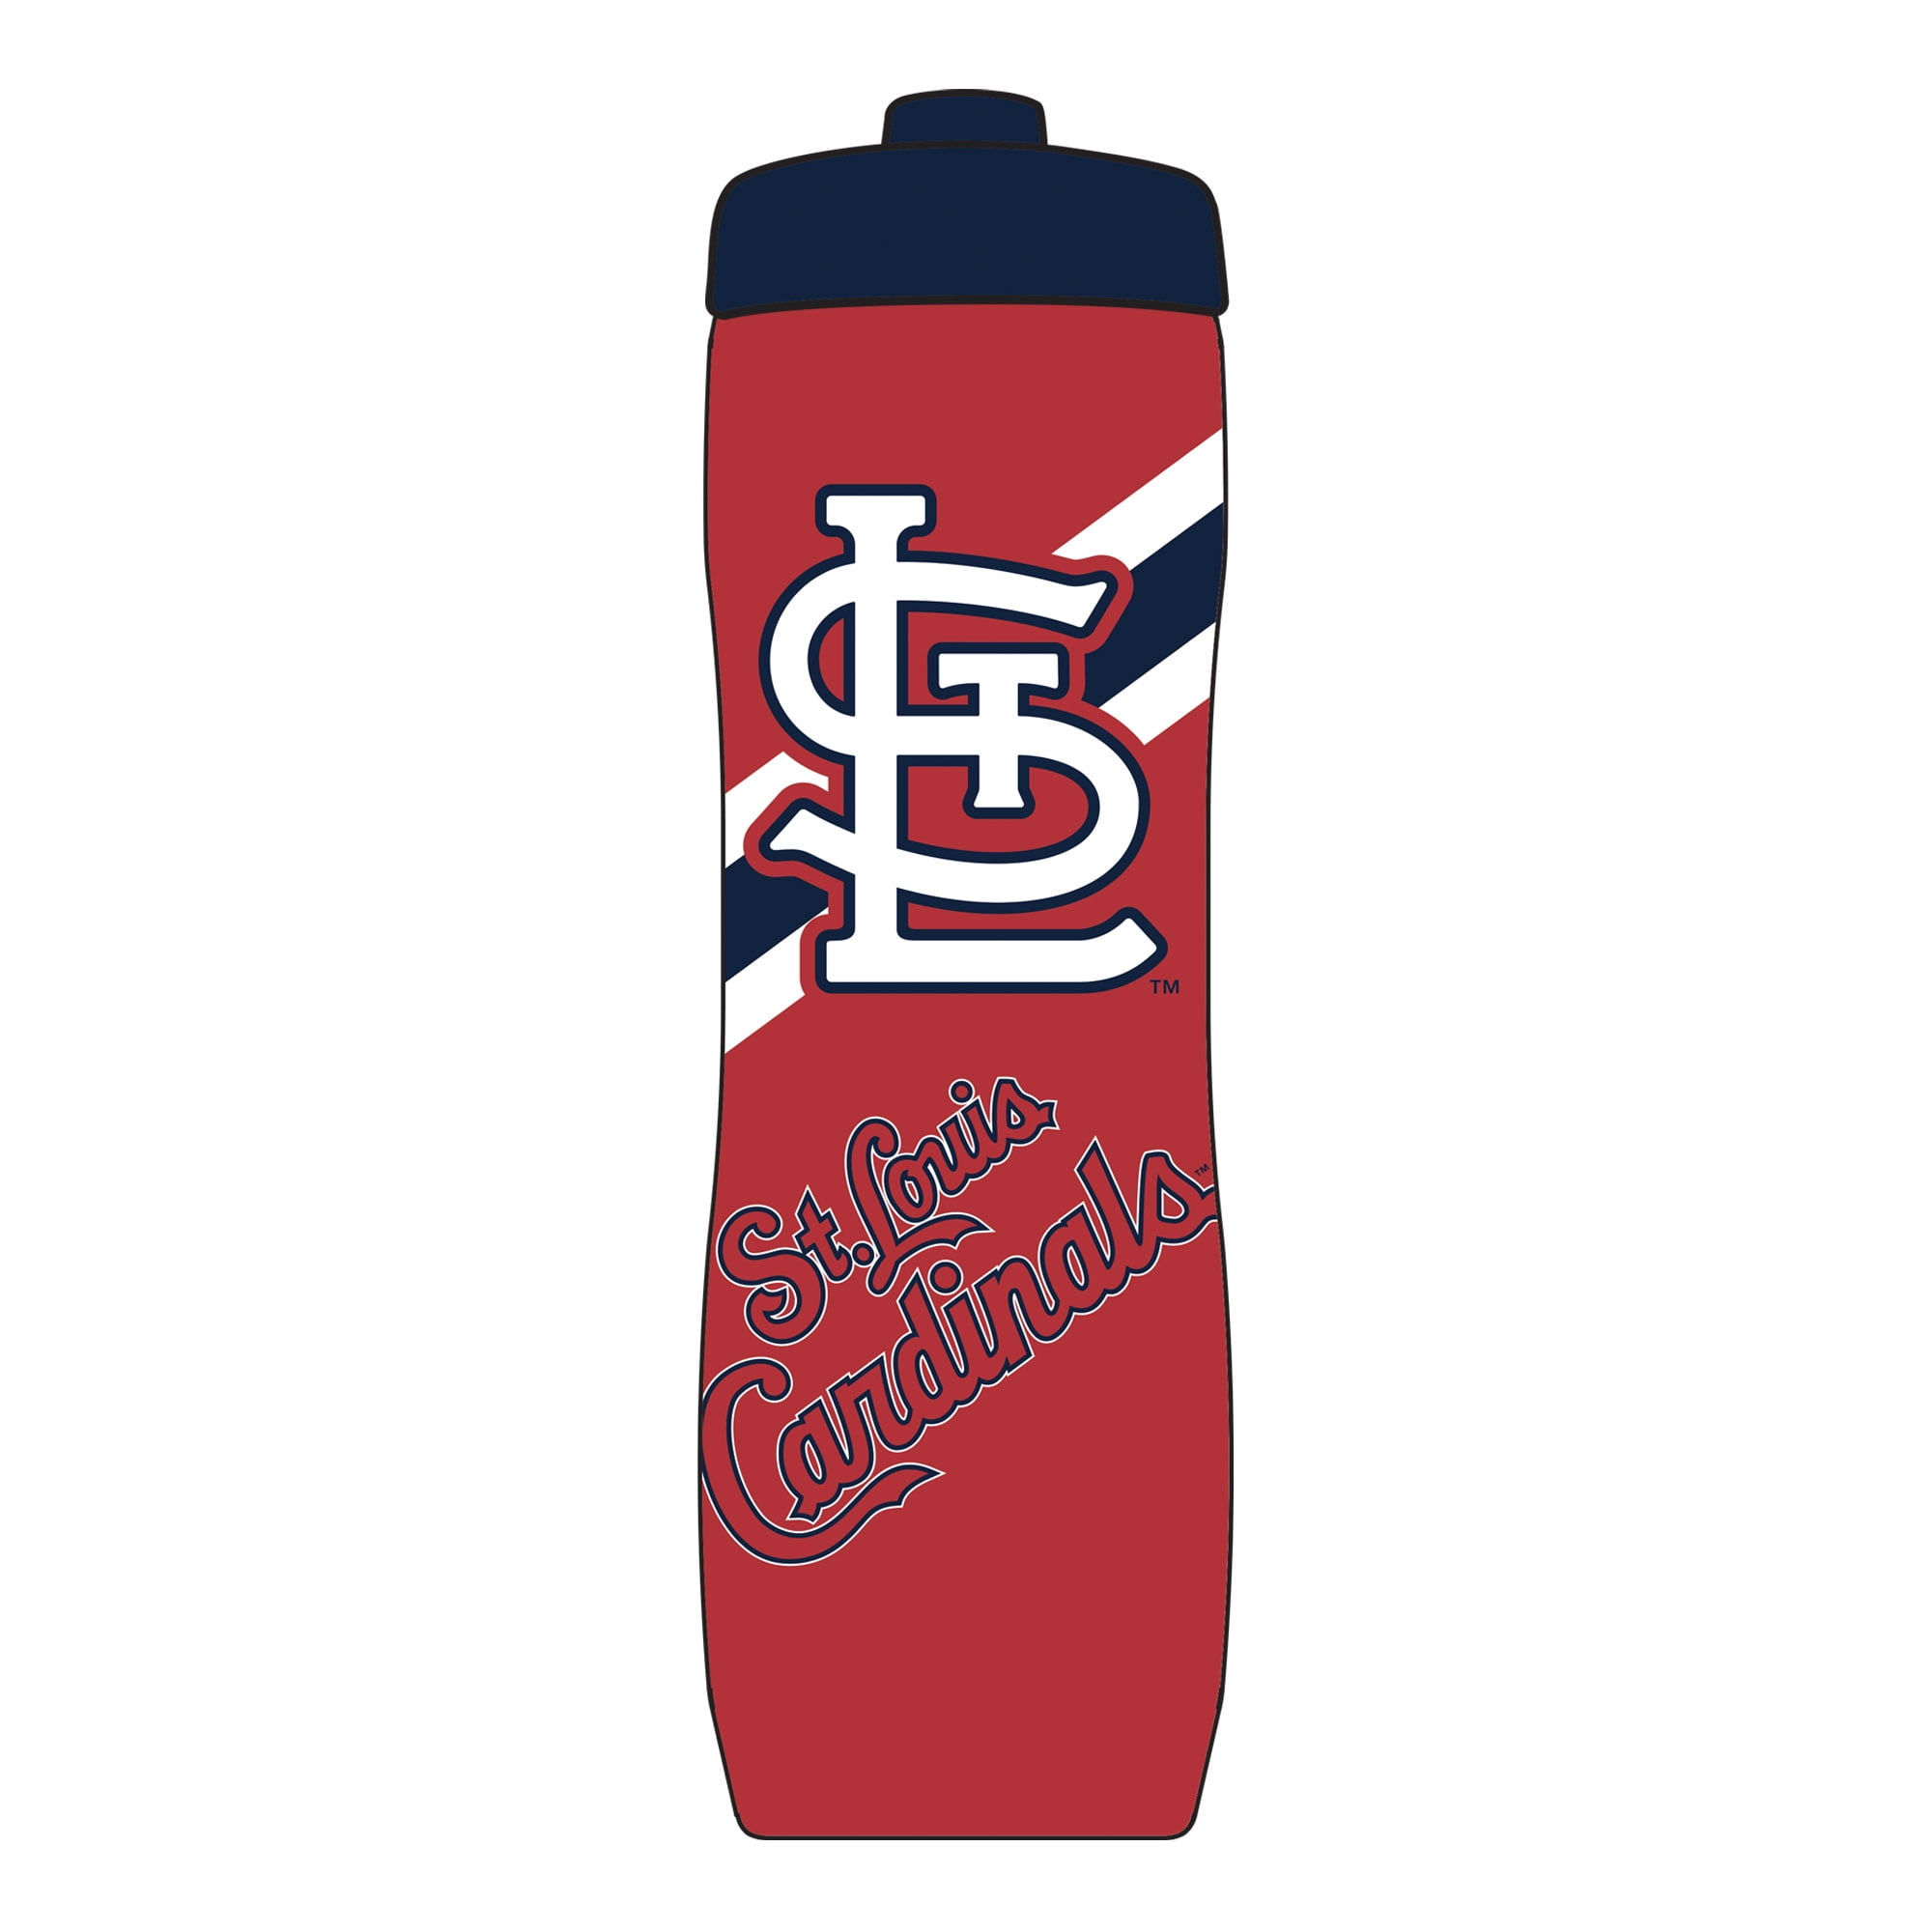 Saint Louis Cardinals MLB Official Licensed Baby Bootie Socks